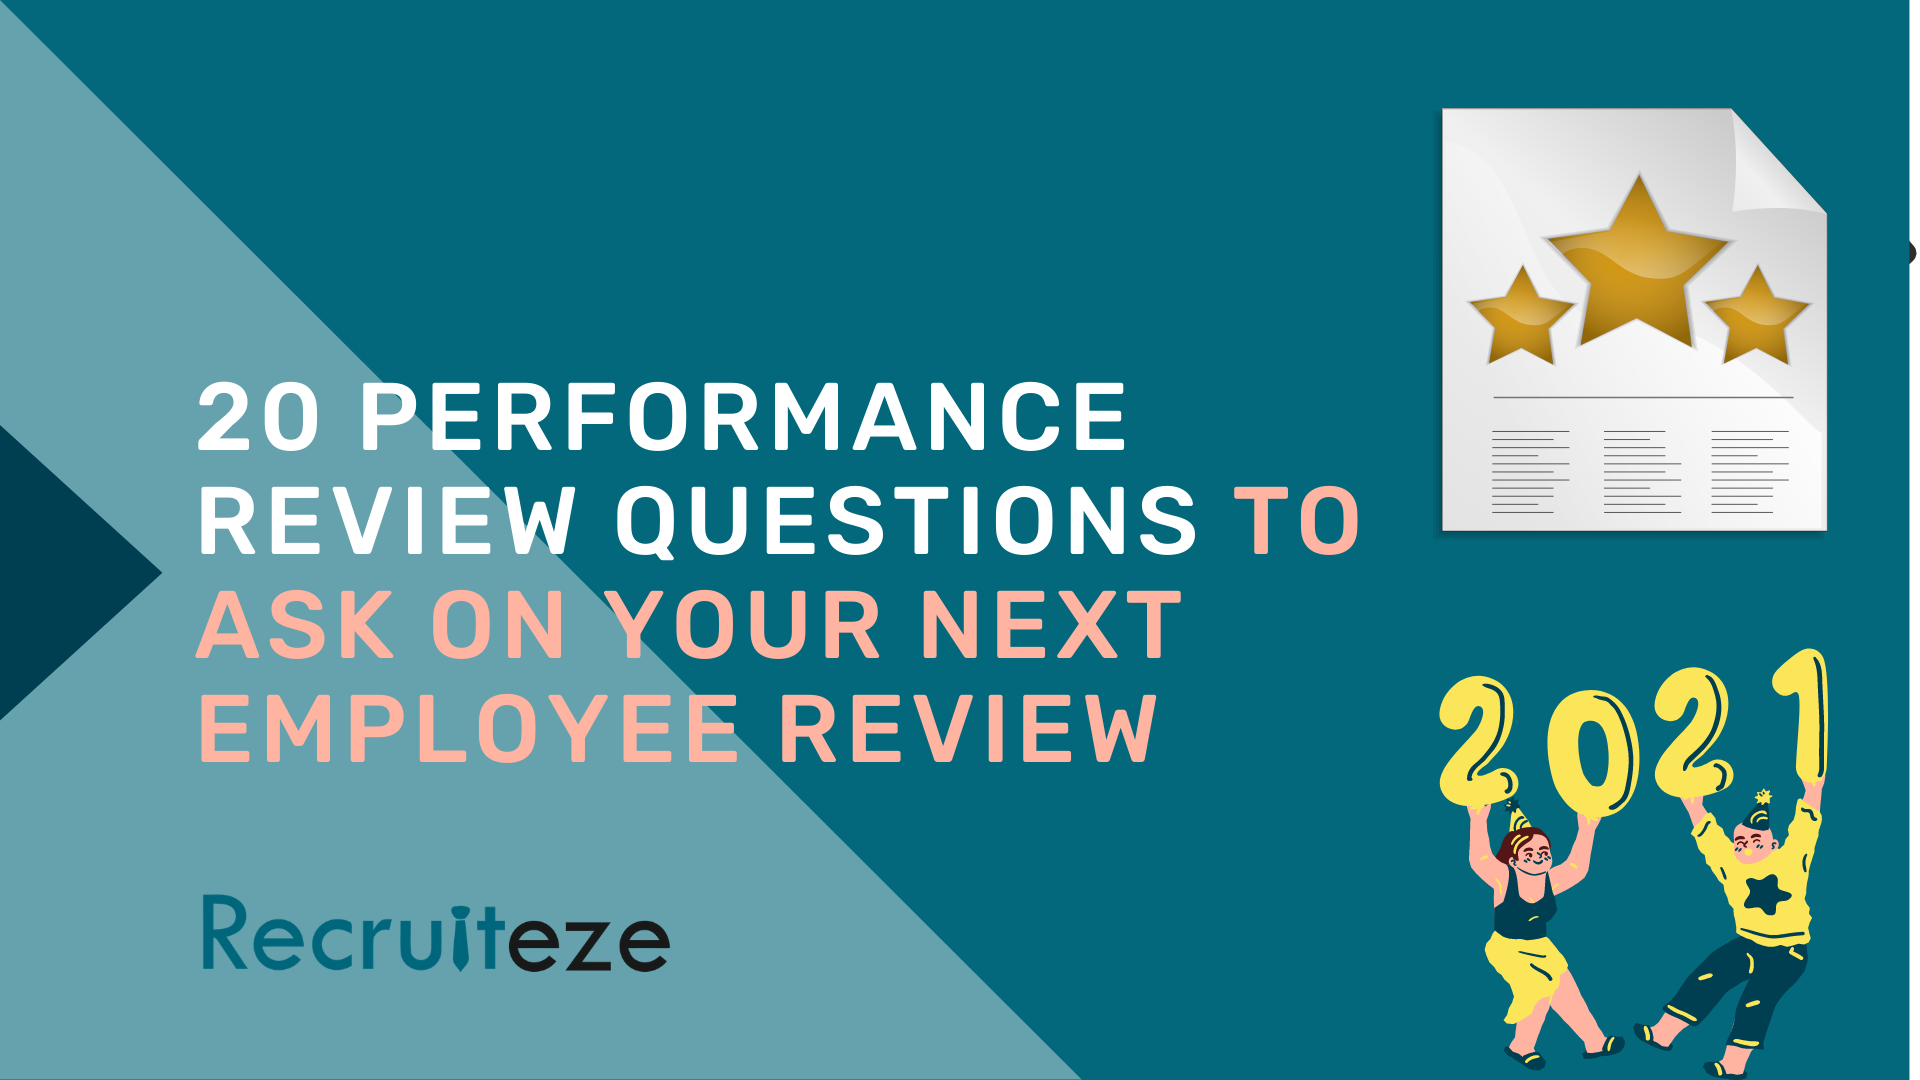 Performance Review Questions featured image